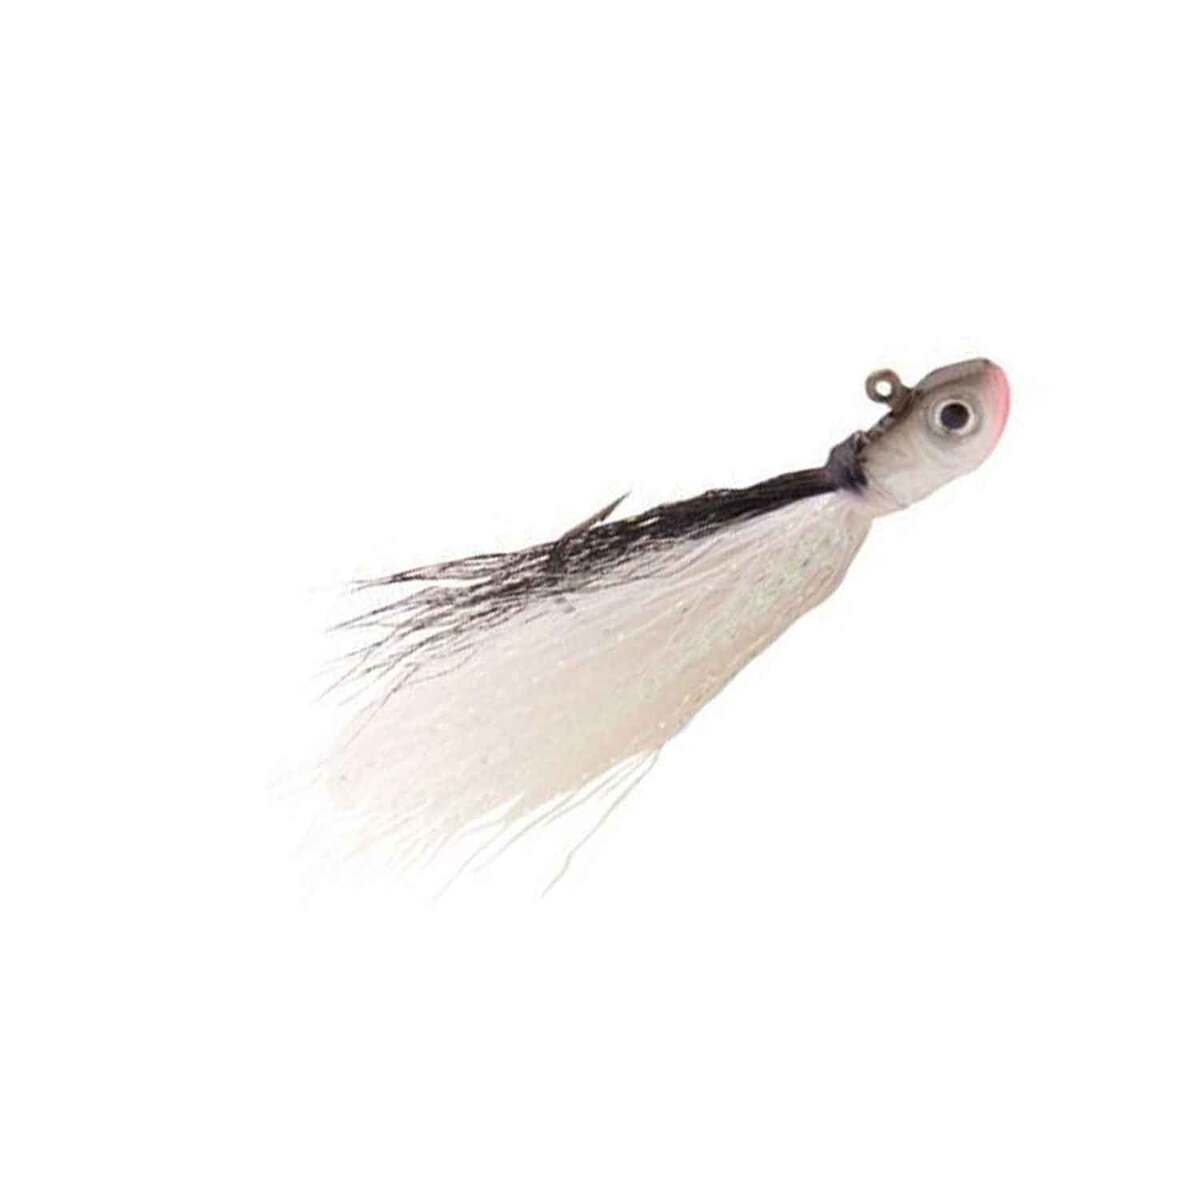 Northland Jig All Freshwater Fishing Baits, Lures for sale